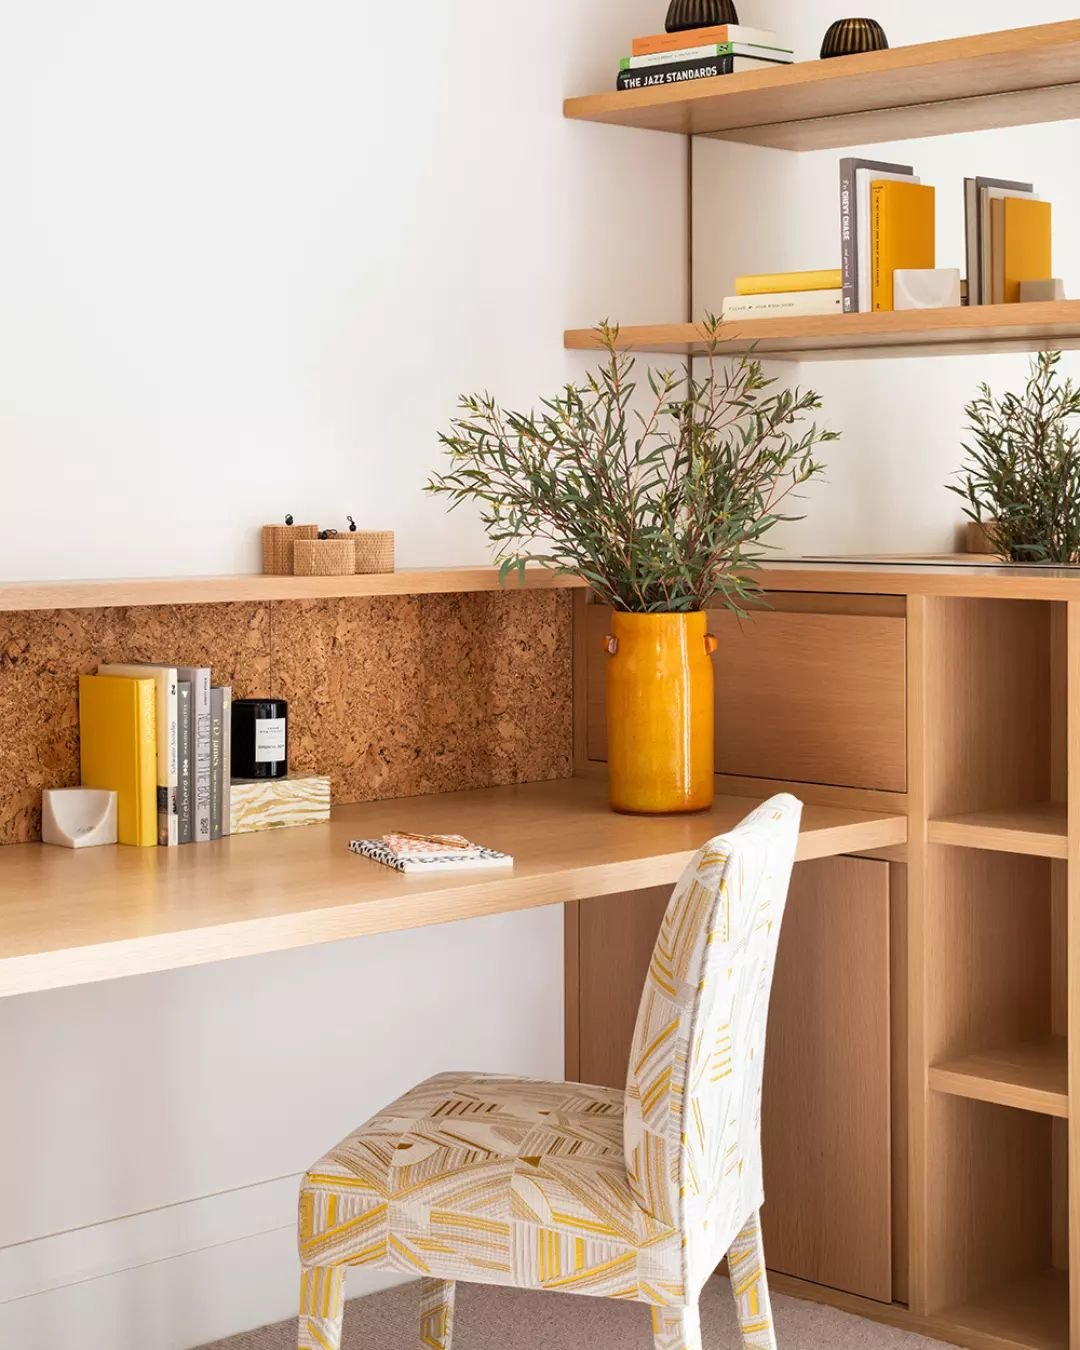 Bringing the sunshine to your 'work from home' space&nbsp;✨

This gorgeous area at the Holland Park Villas has been infused with pops of yellow to brighten up the space 💛 &nbsp;

Find out how we can transform your home office by getting in contact w